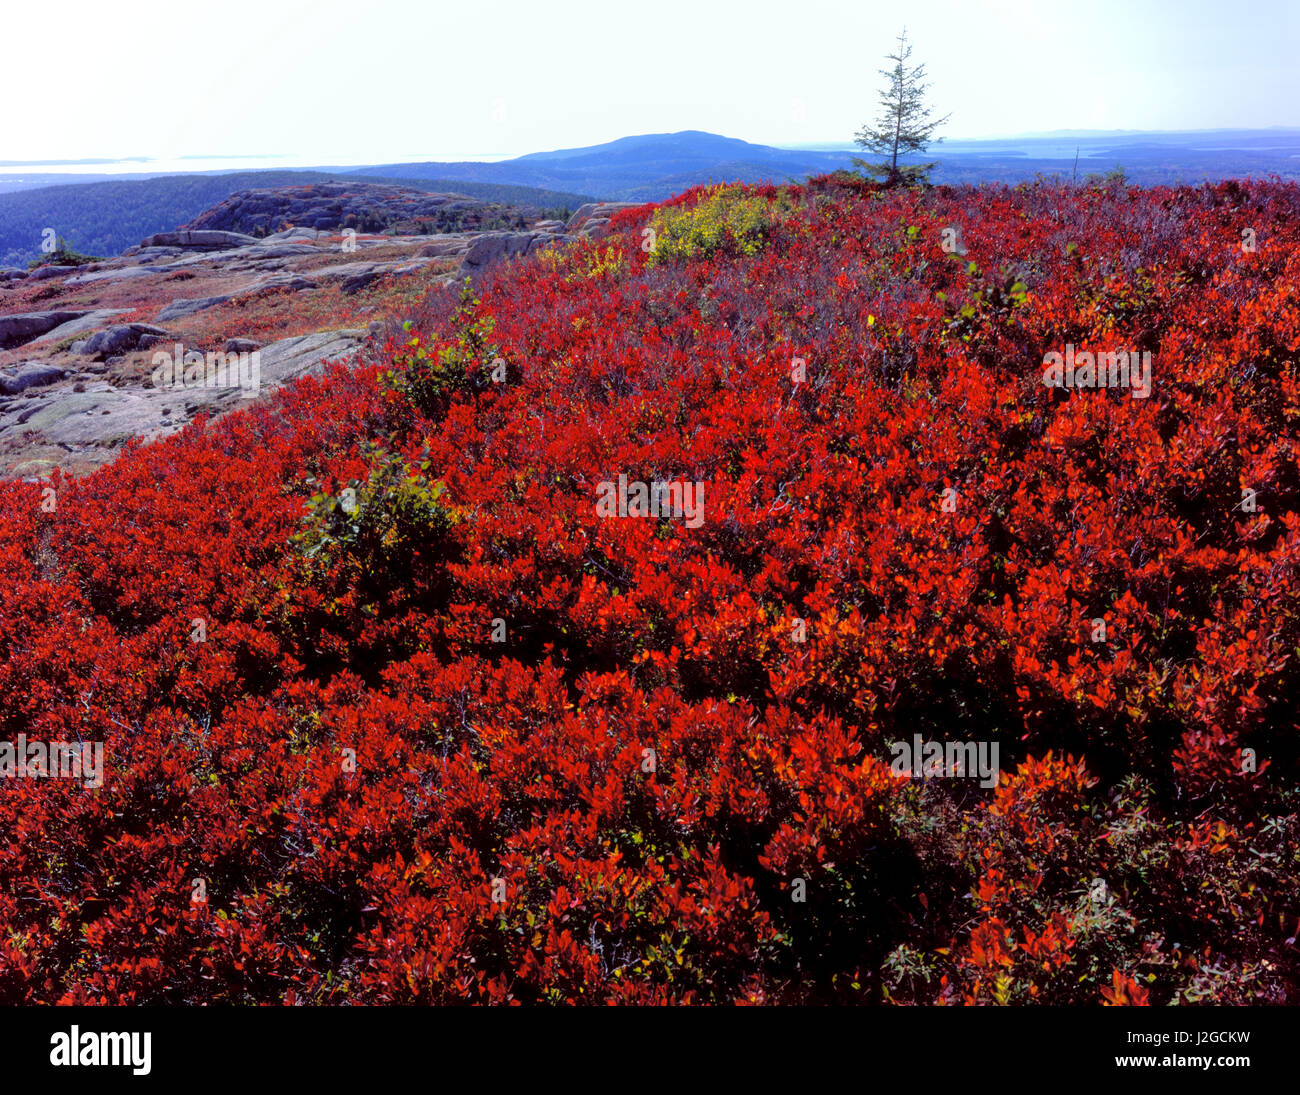 Acadia National Park, Maine. USA. Scarlet foliage of black huckleberry (Gaylussacia baccata) in autumn on Gilmore Peak. Mt. Desert Island. (Large format sizes available) Stock Photo